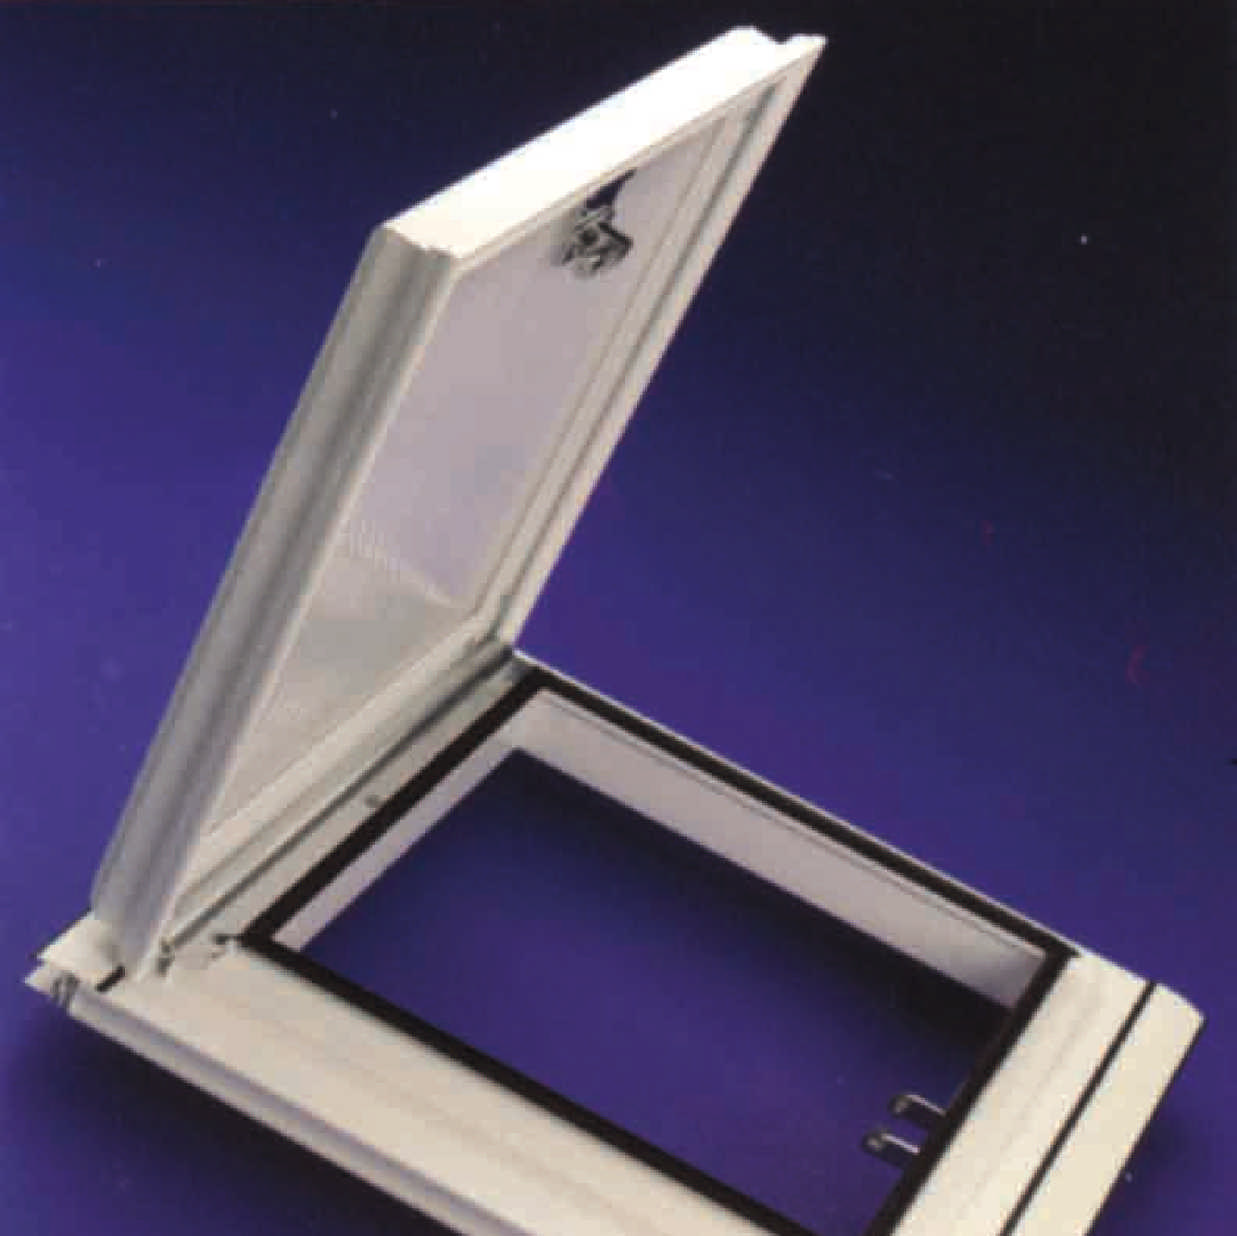 Buy Aluminium/uPVC Conservatory Roof Vent (Bar-to-Bar) for 25mm thick polycarbonate online today